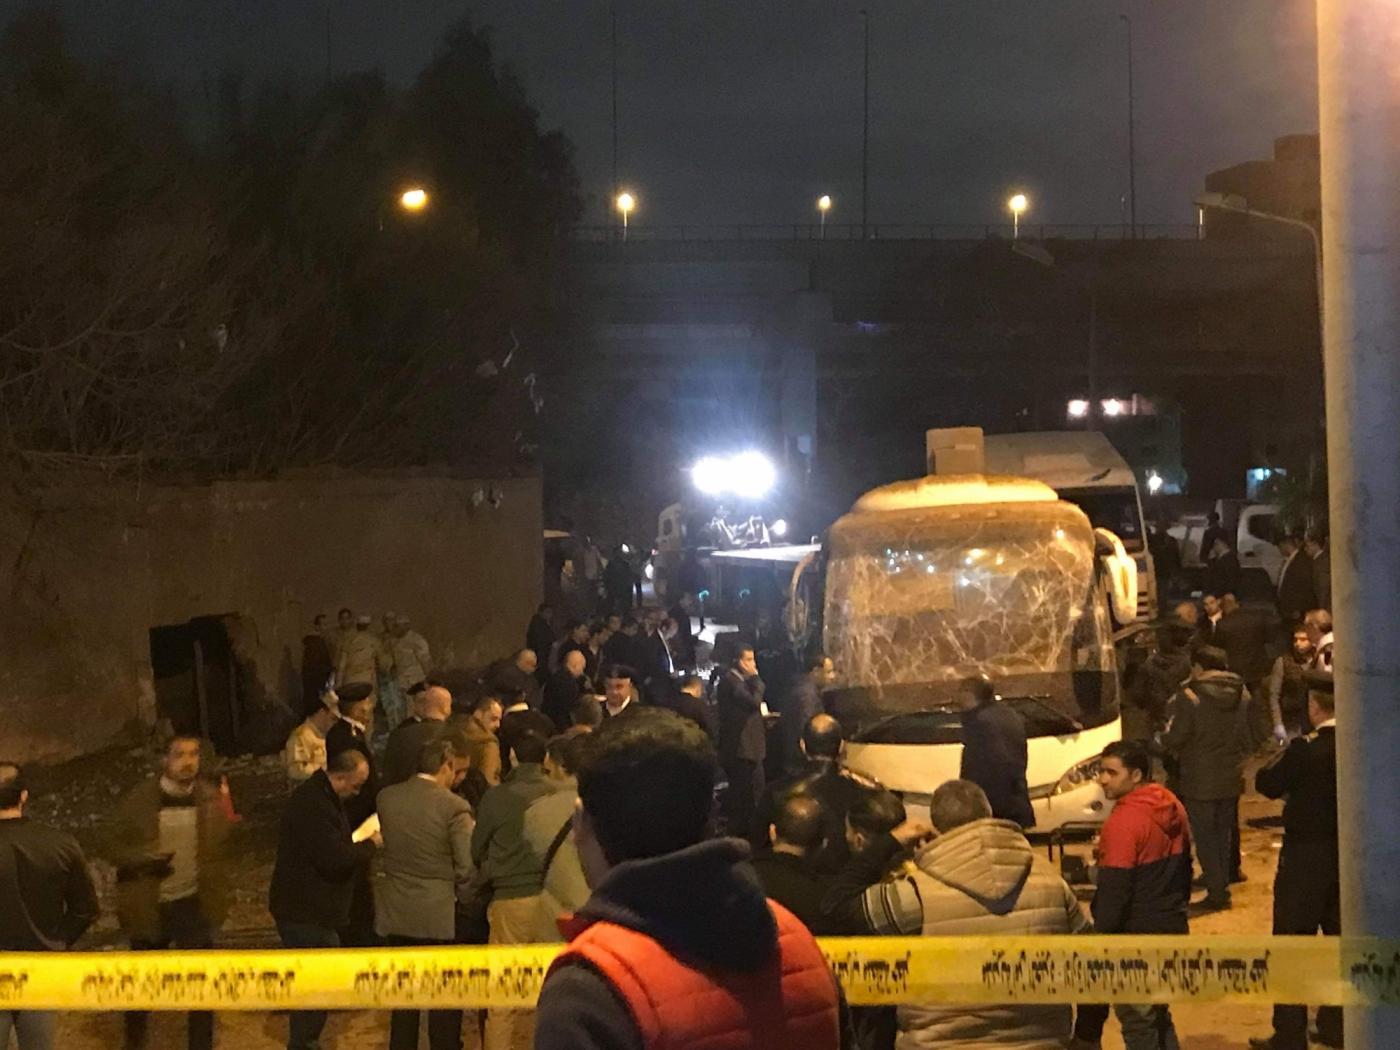 GIZA, Dec. 28, 2018 (Xinhua) -- Photo taken on Dec. 28, 2018 shows the site of an explosion in Giza, Egypt. Two Vietnamese tourists were killed Friday when a home-made bomb hit a bus carrying foreign tourists in Marioutiya area near the Giza Pyramids, Egyptian interior ministry said. (Xinhua/Ahmed Gomaa/IANS) by .